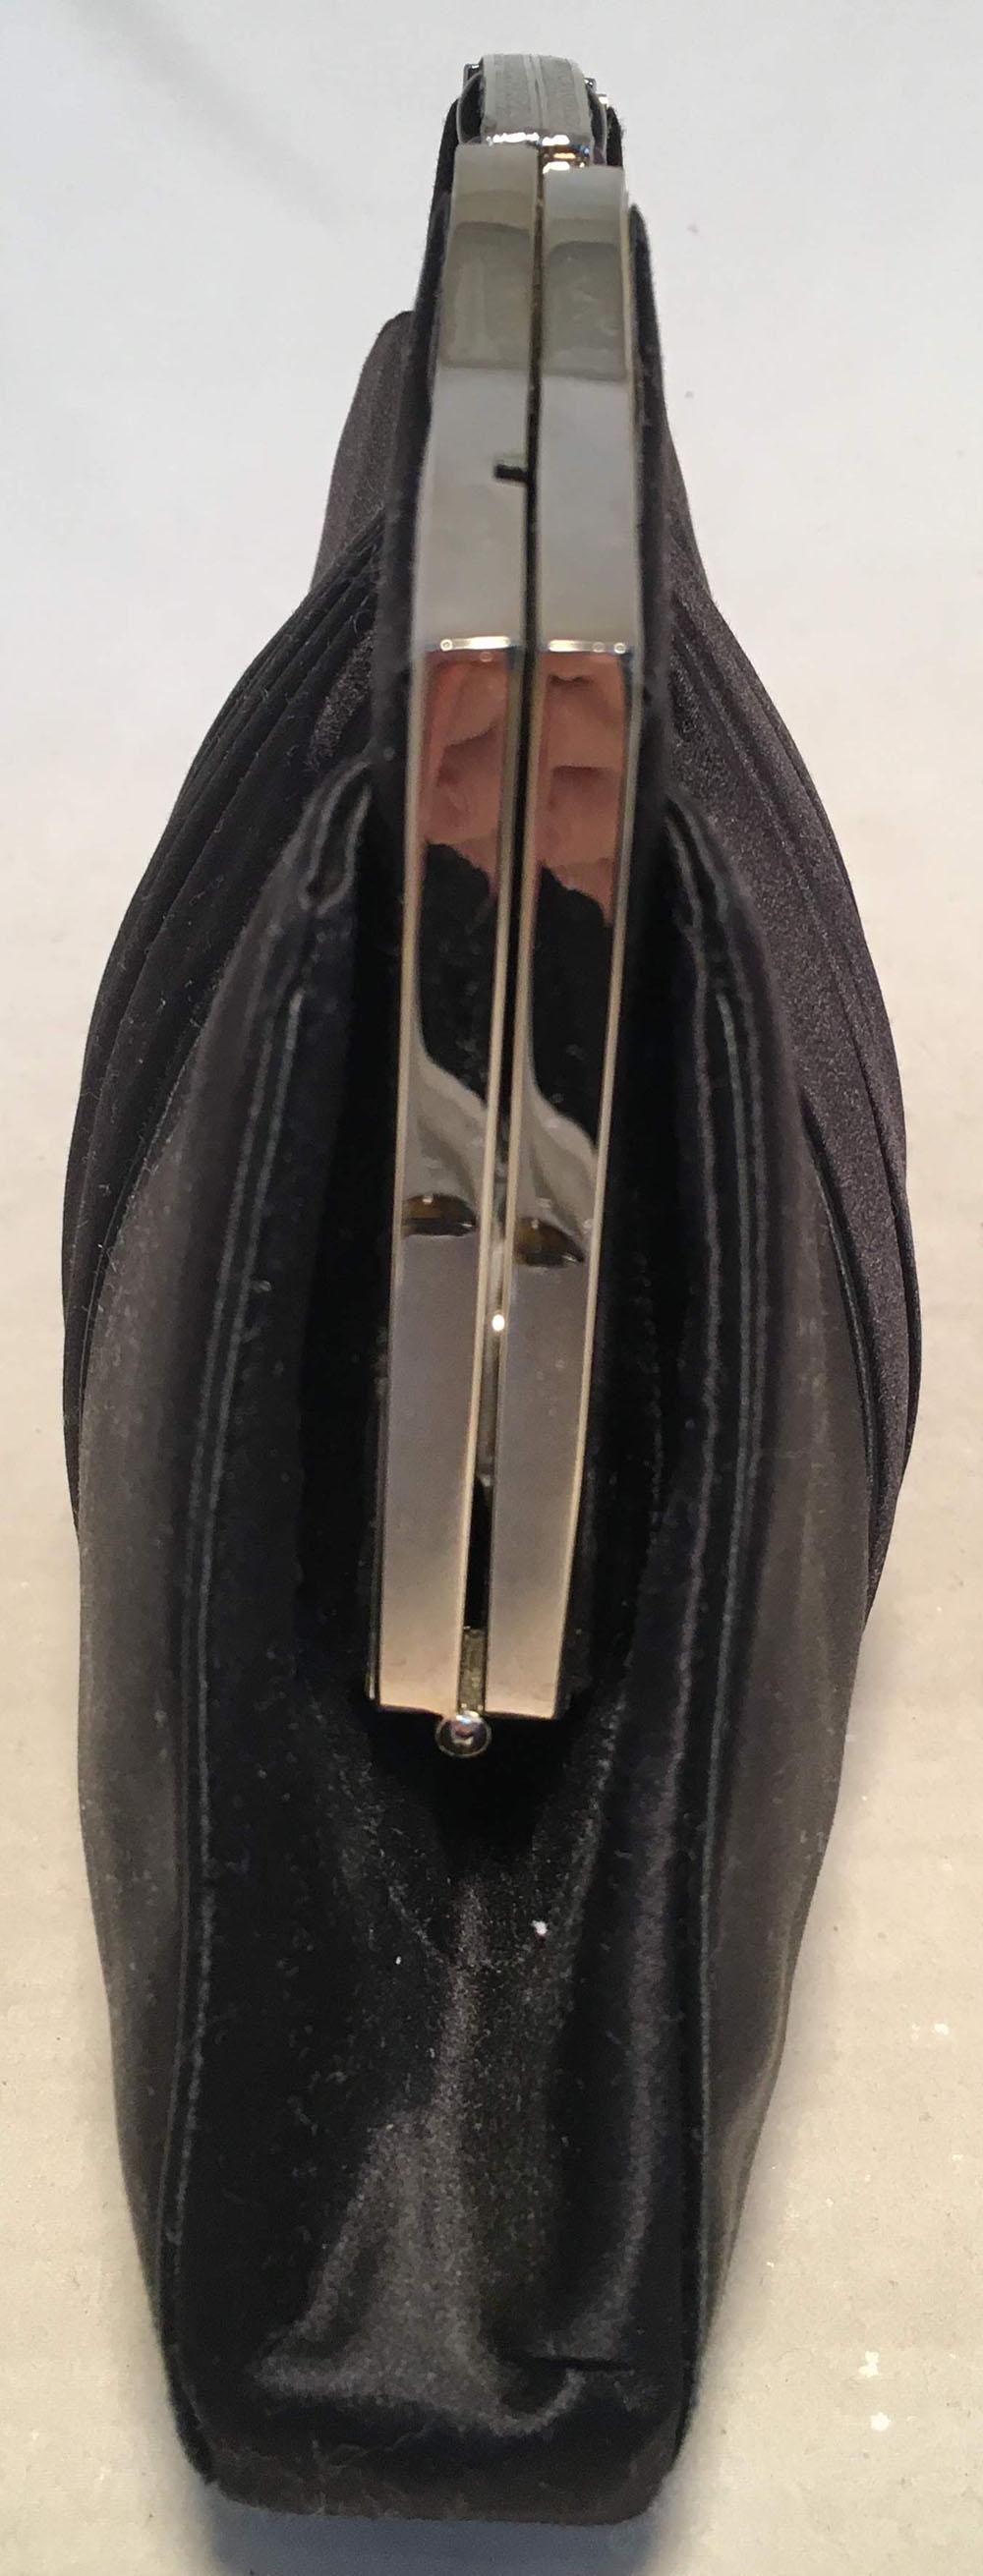 Judith Leiber Vintage Black Pleated Silk Clutch In Excellent Condition For Sale In Philadelphia, PA